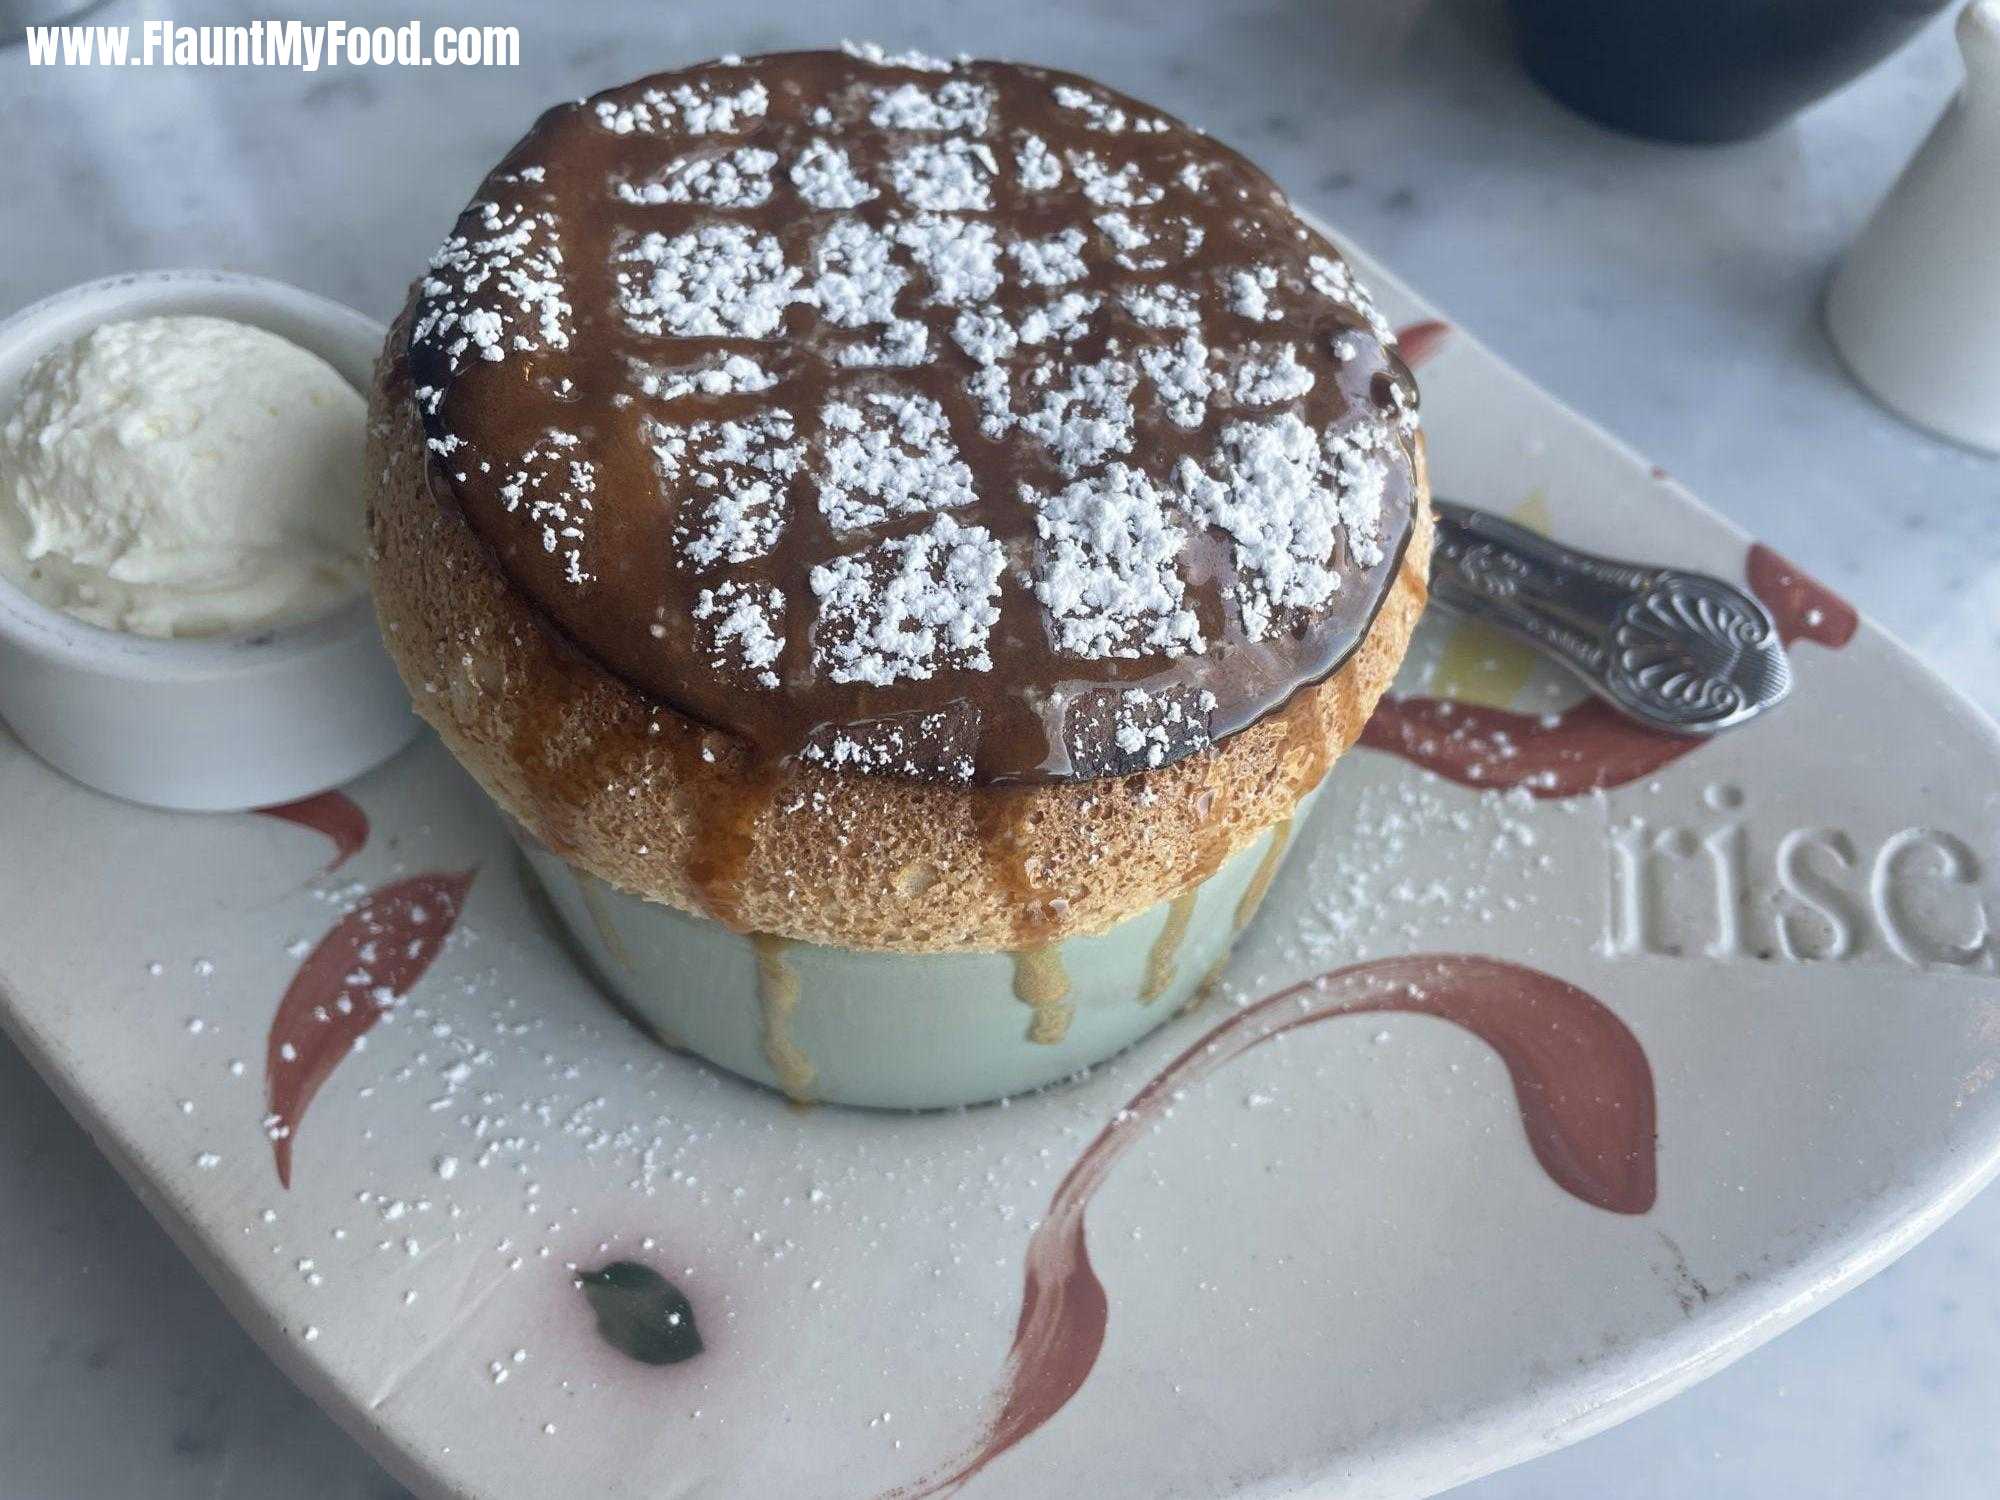 Pecan pralines Soufflé at rise in Clearfork Texas in Fort Worth